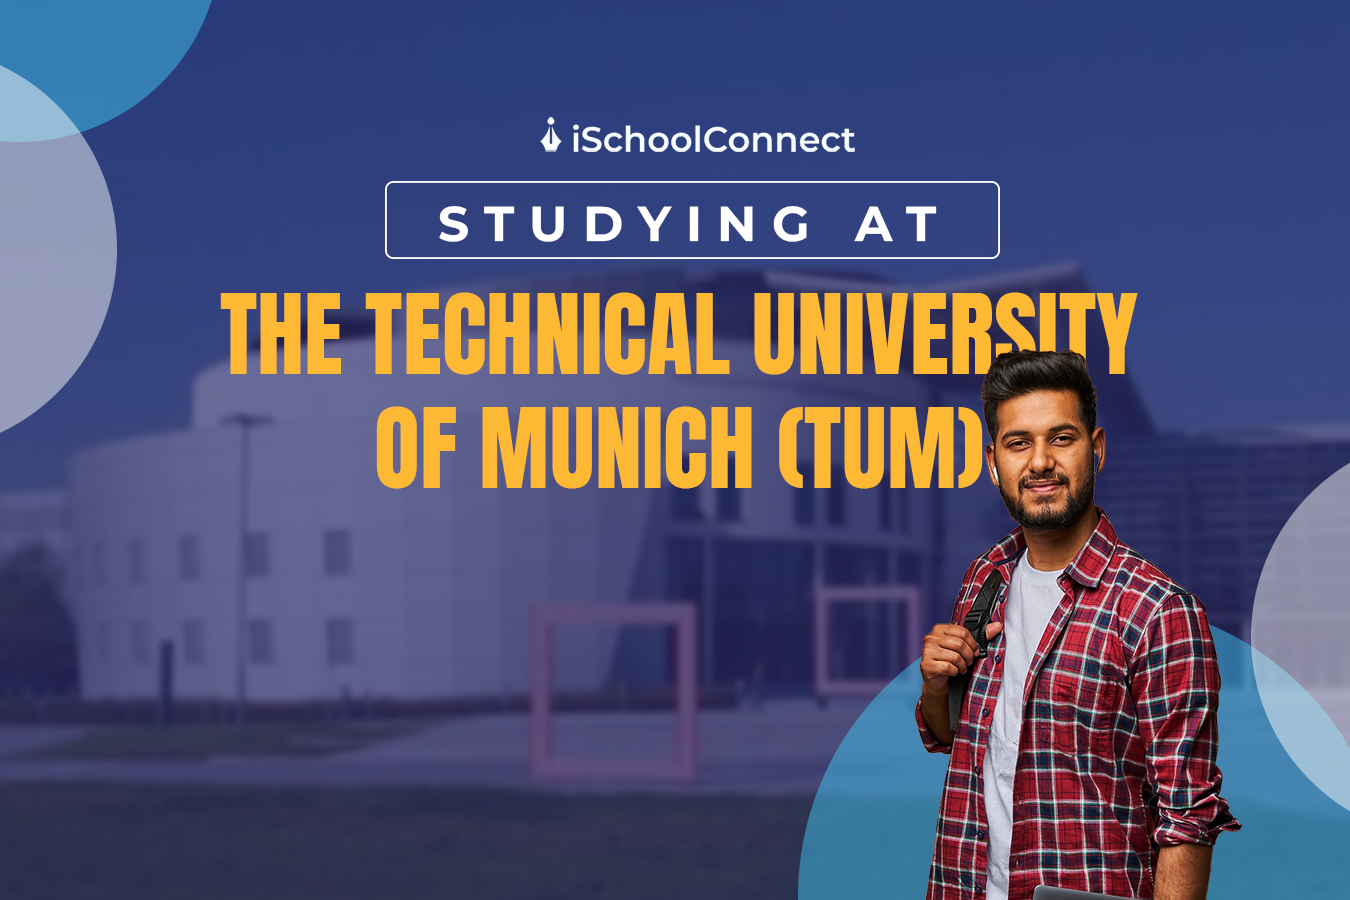 Why study at the Technical University of Munich (TUM)?